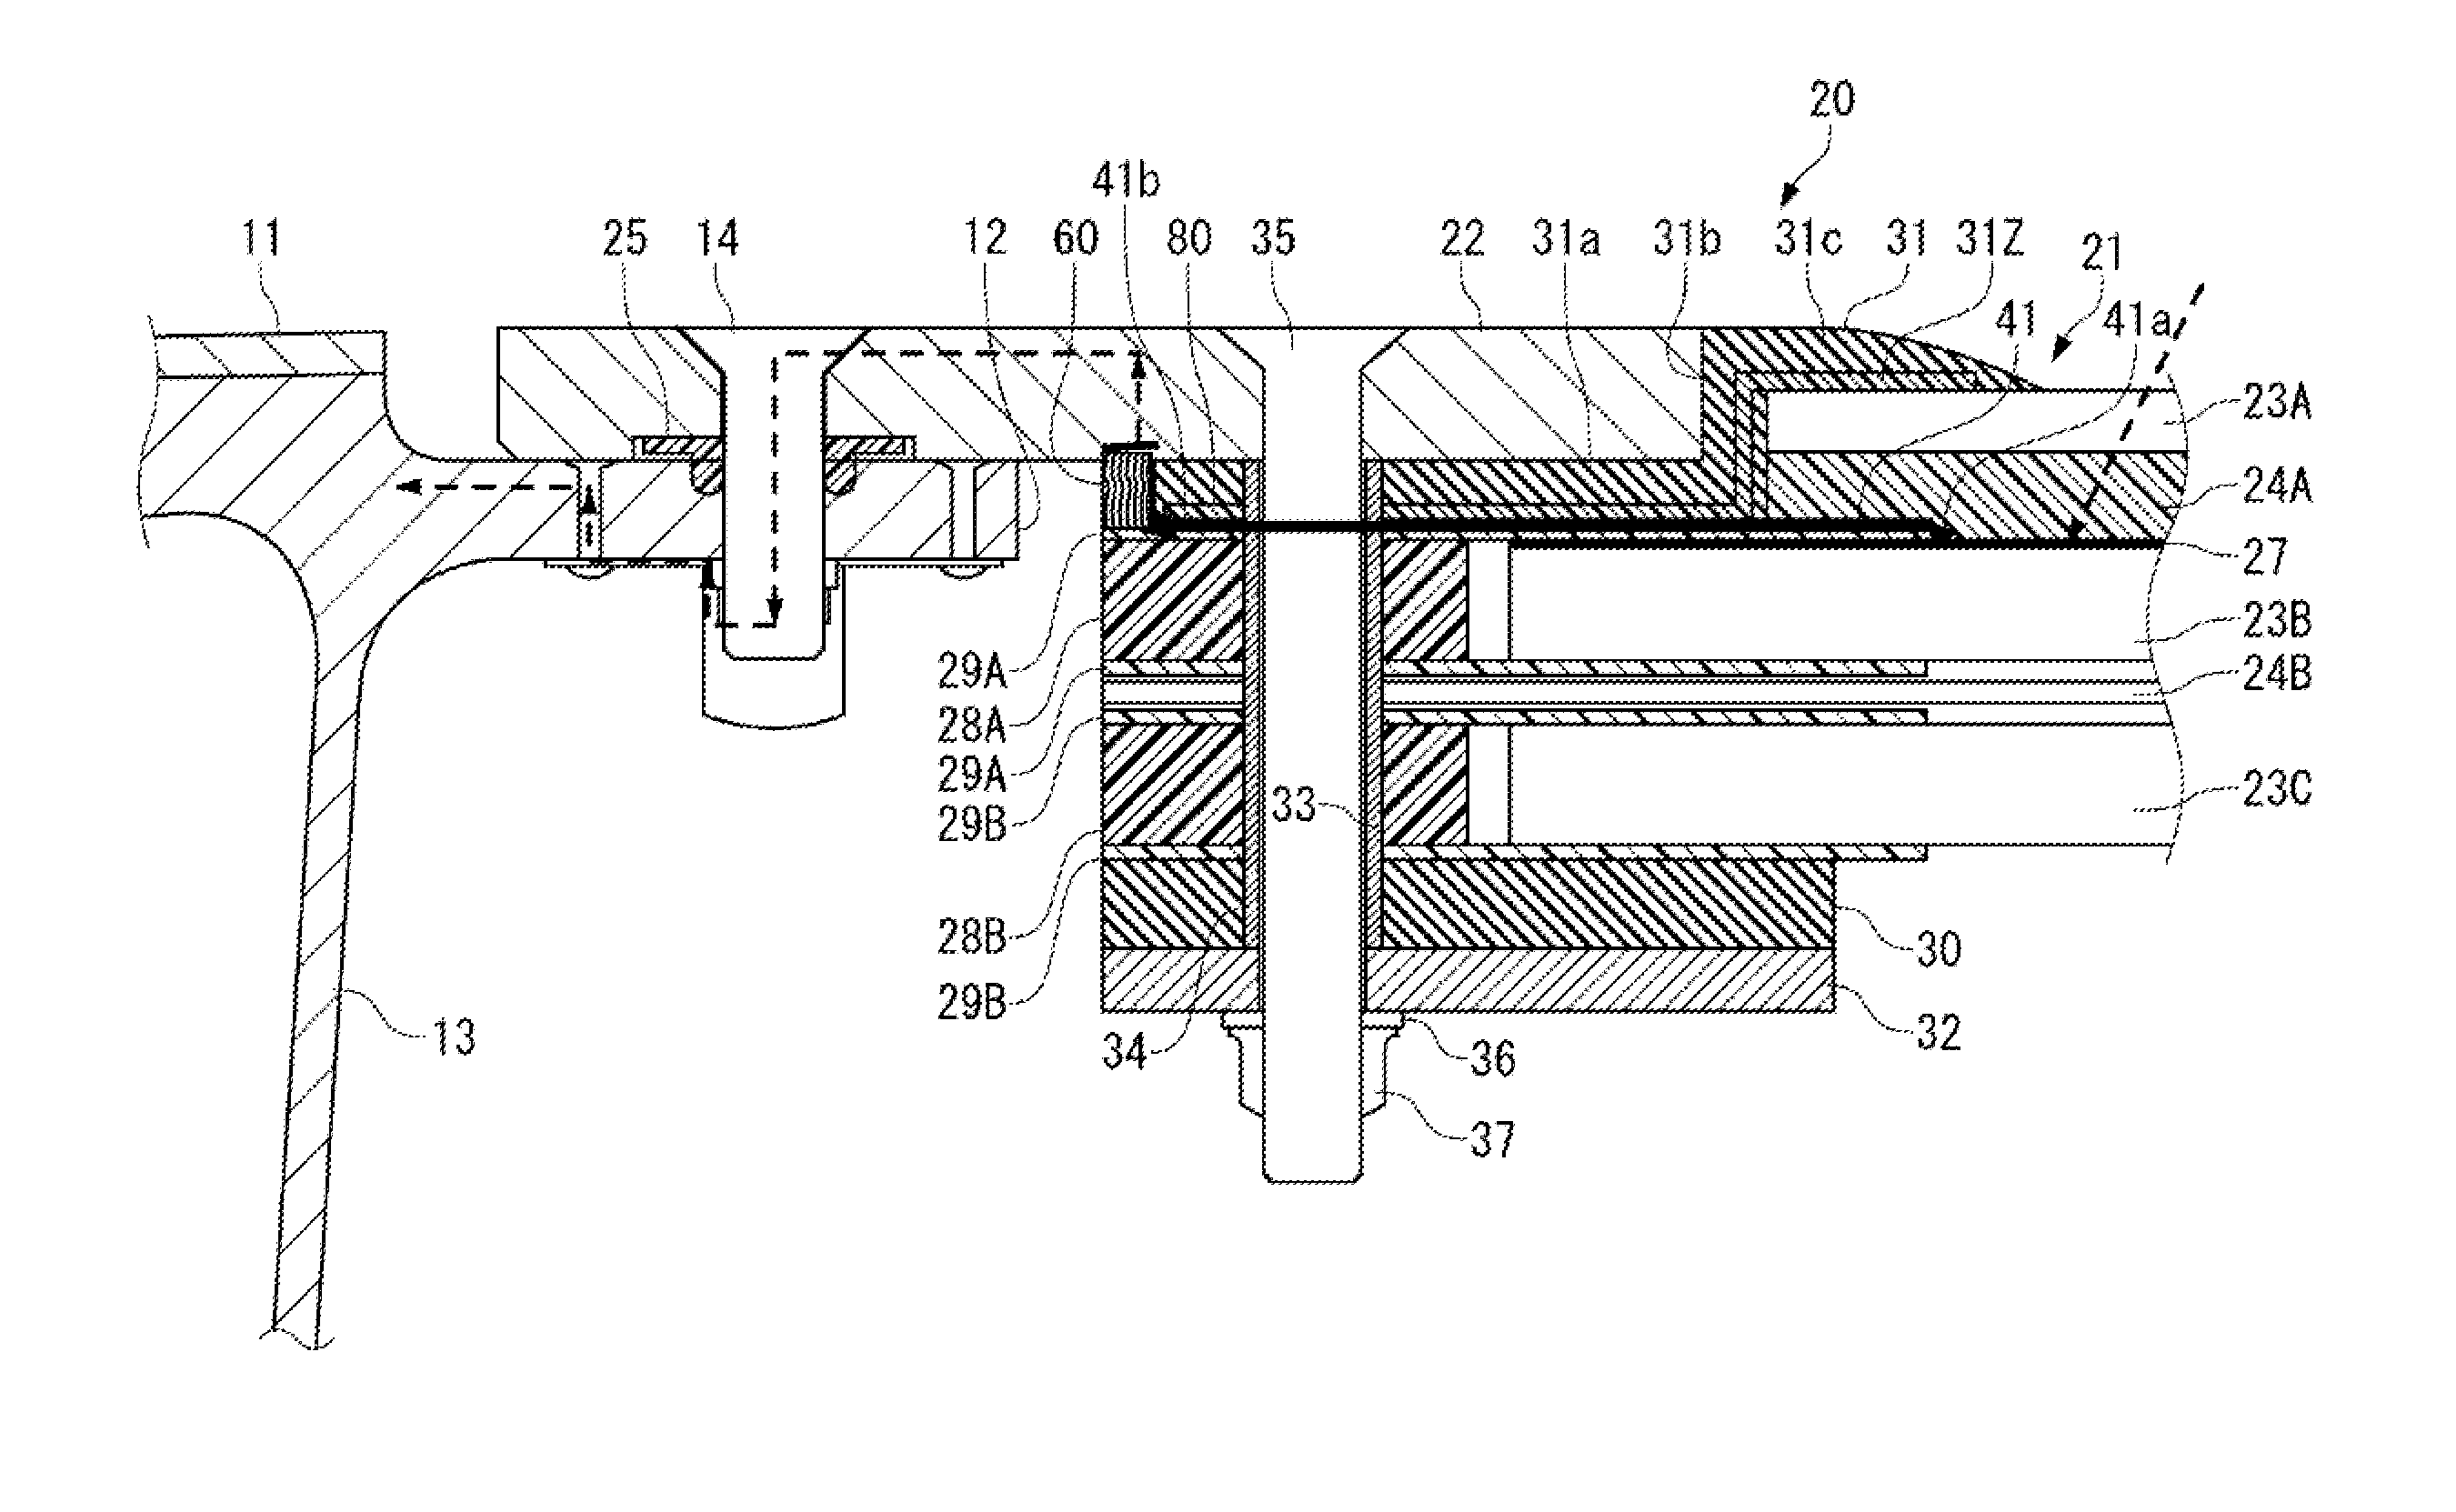 Window of aircraft, aircraft, and assembly method for window of aircraft